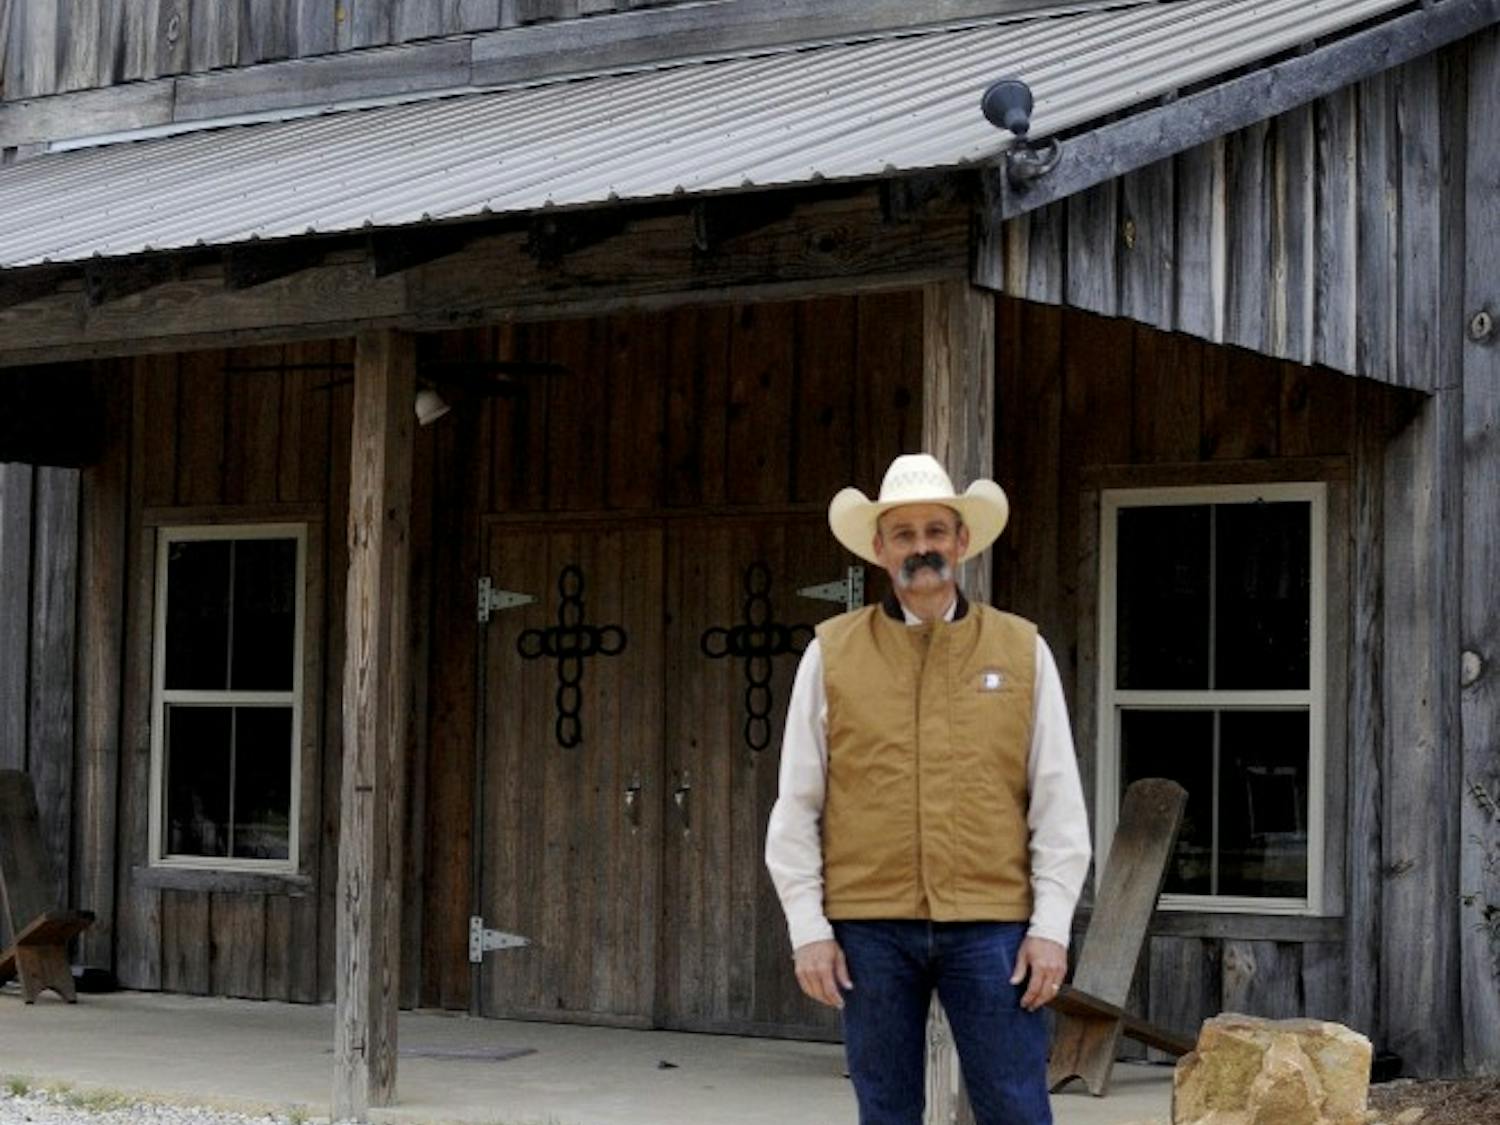 Head pastor Jim Strickland stands in front of the Cowboy Church on April 22, in Waverly, Ala.&nbsp;